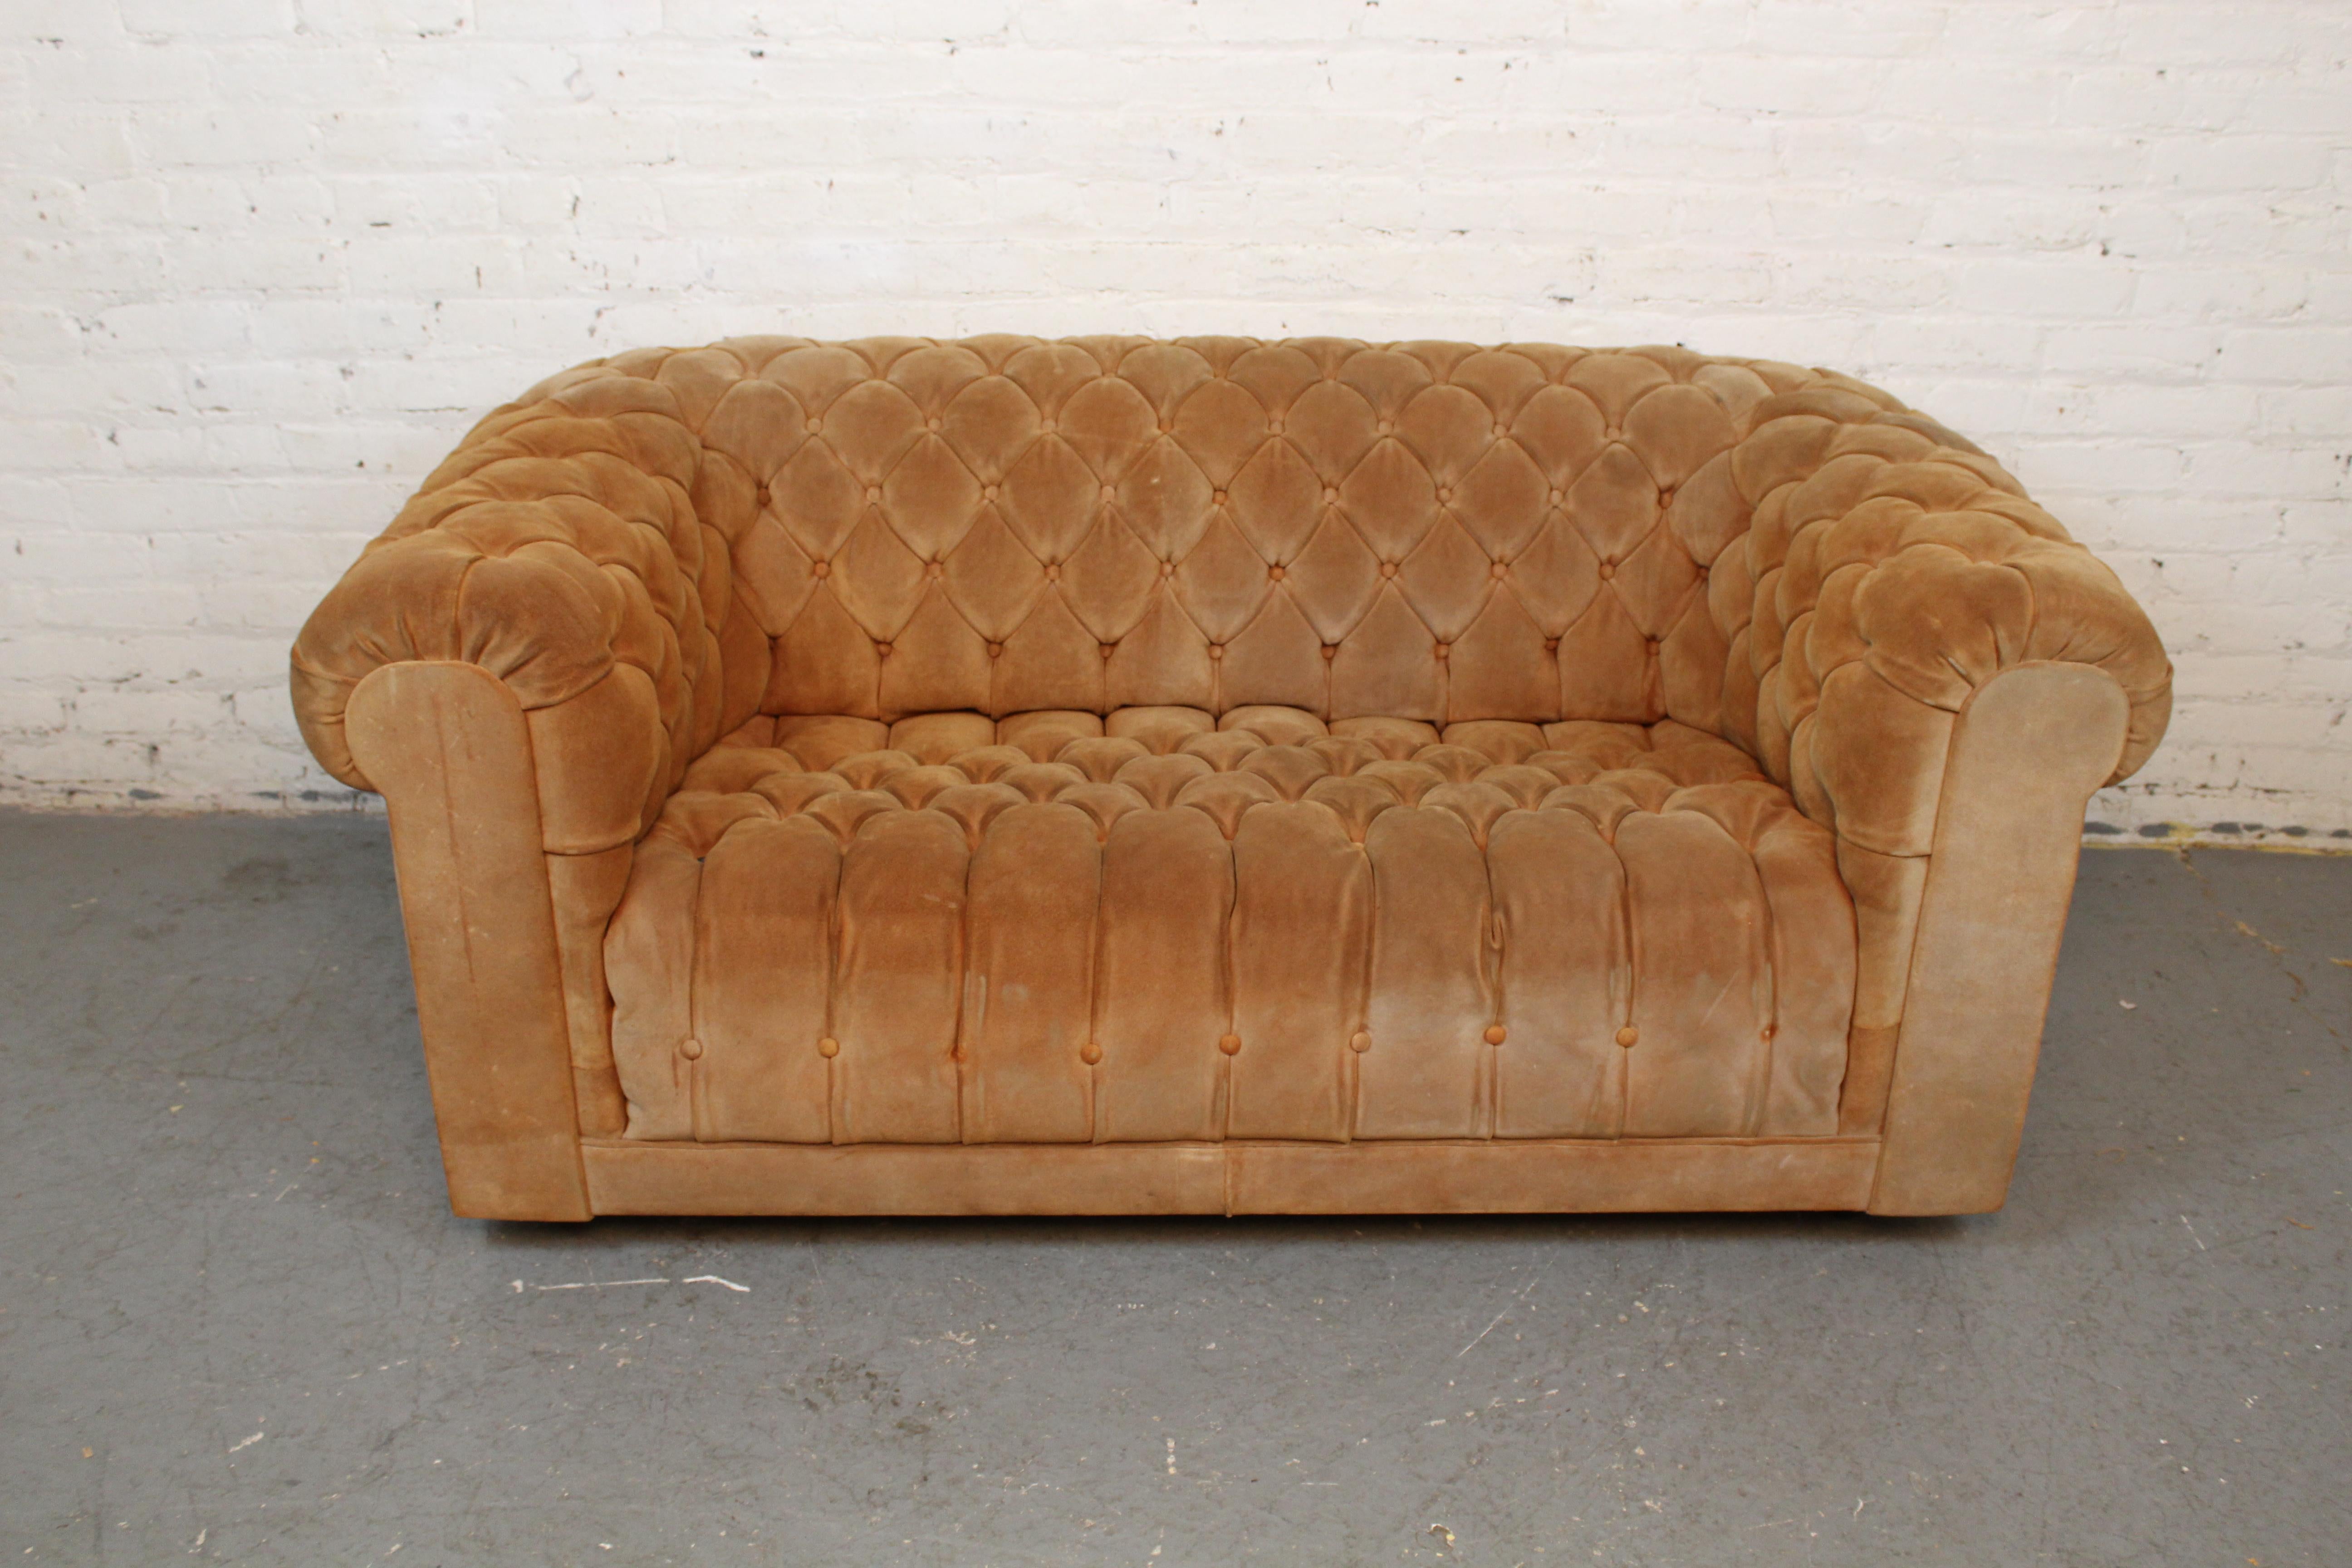 Find out for yourself what has made the Chesterfield the world's most popular sofa of all time with this lovely mid-century suede two-seater! With the iconic design dating back to Lord Philip Stanhope of 17th-Century England and immortalized in the